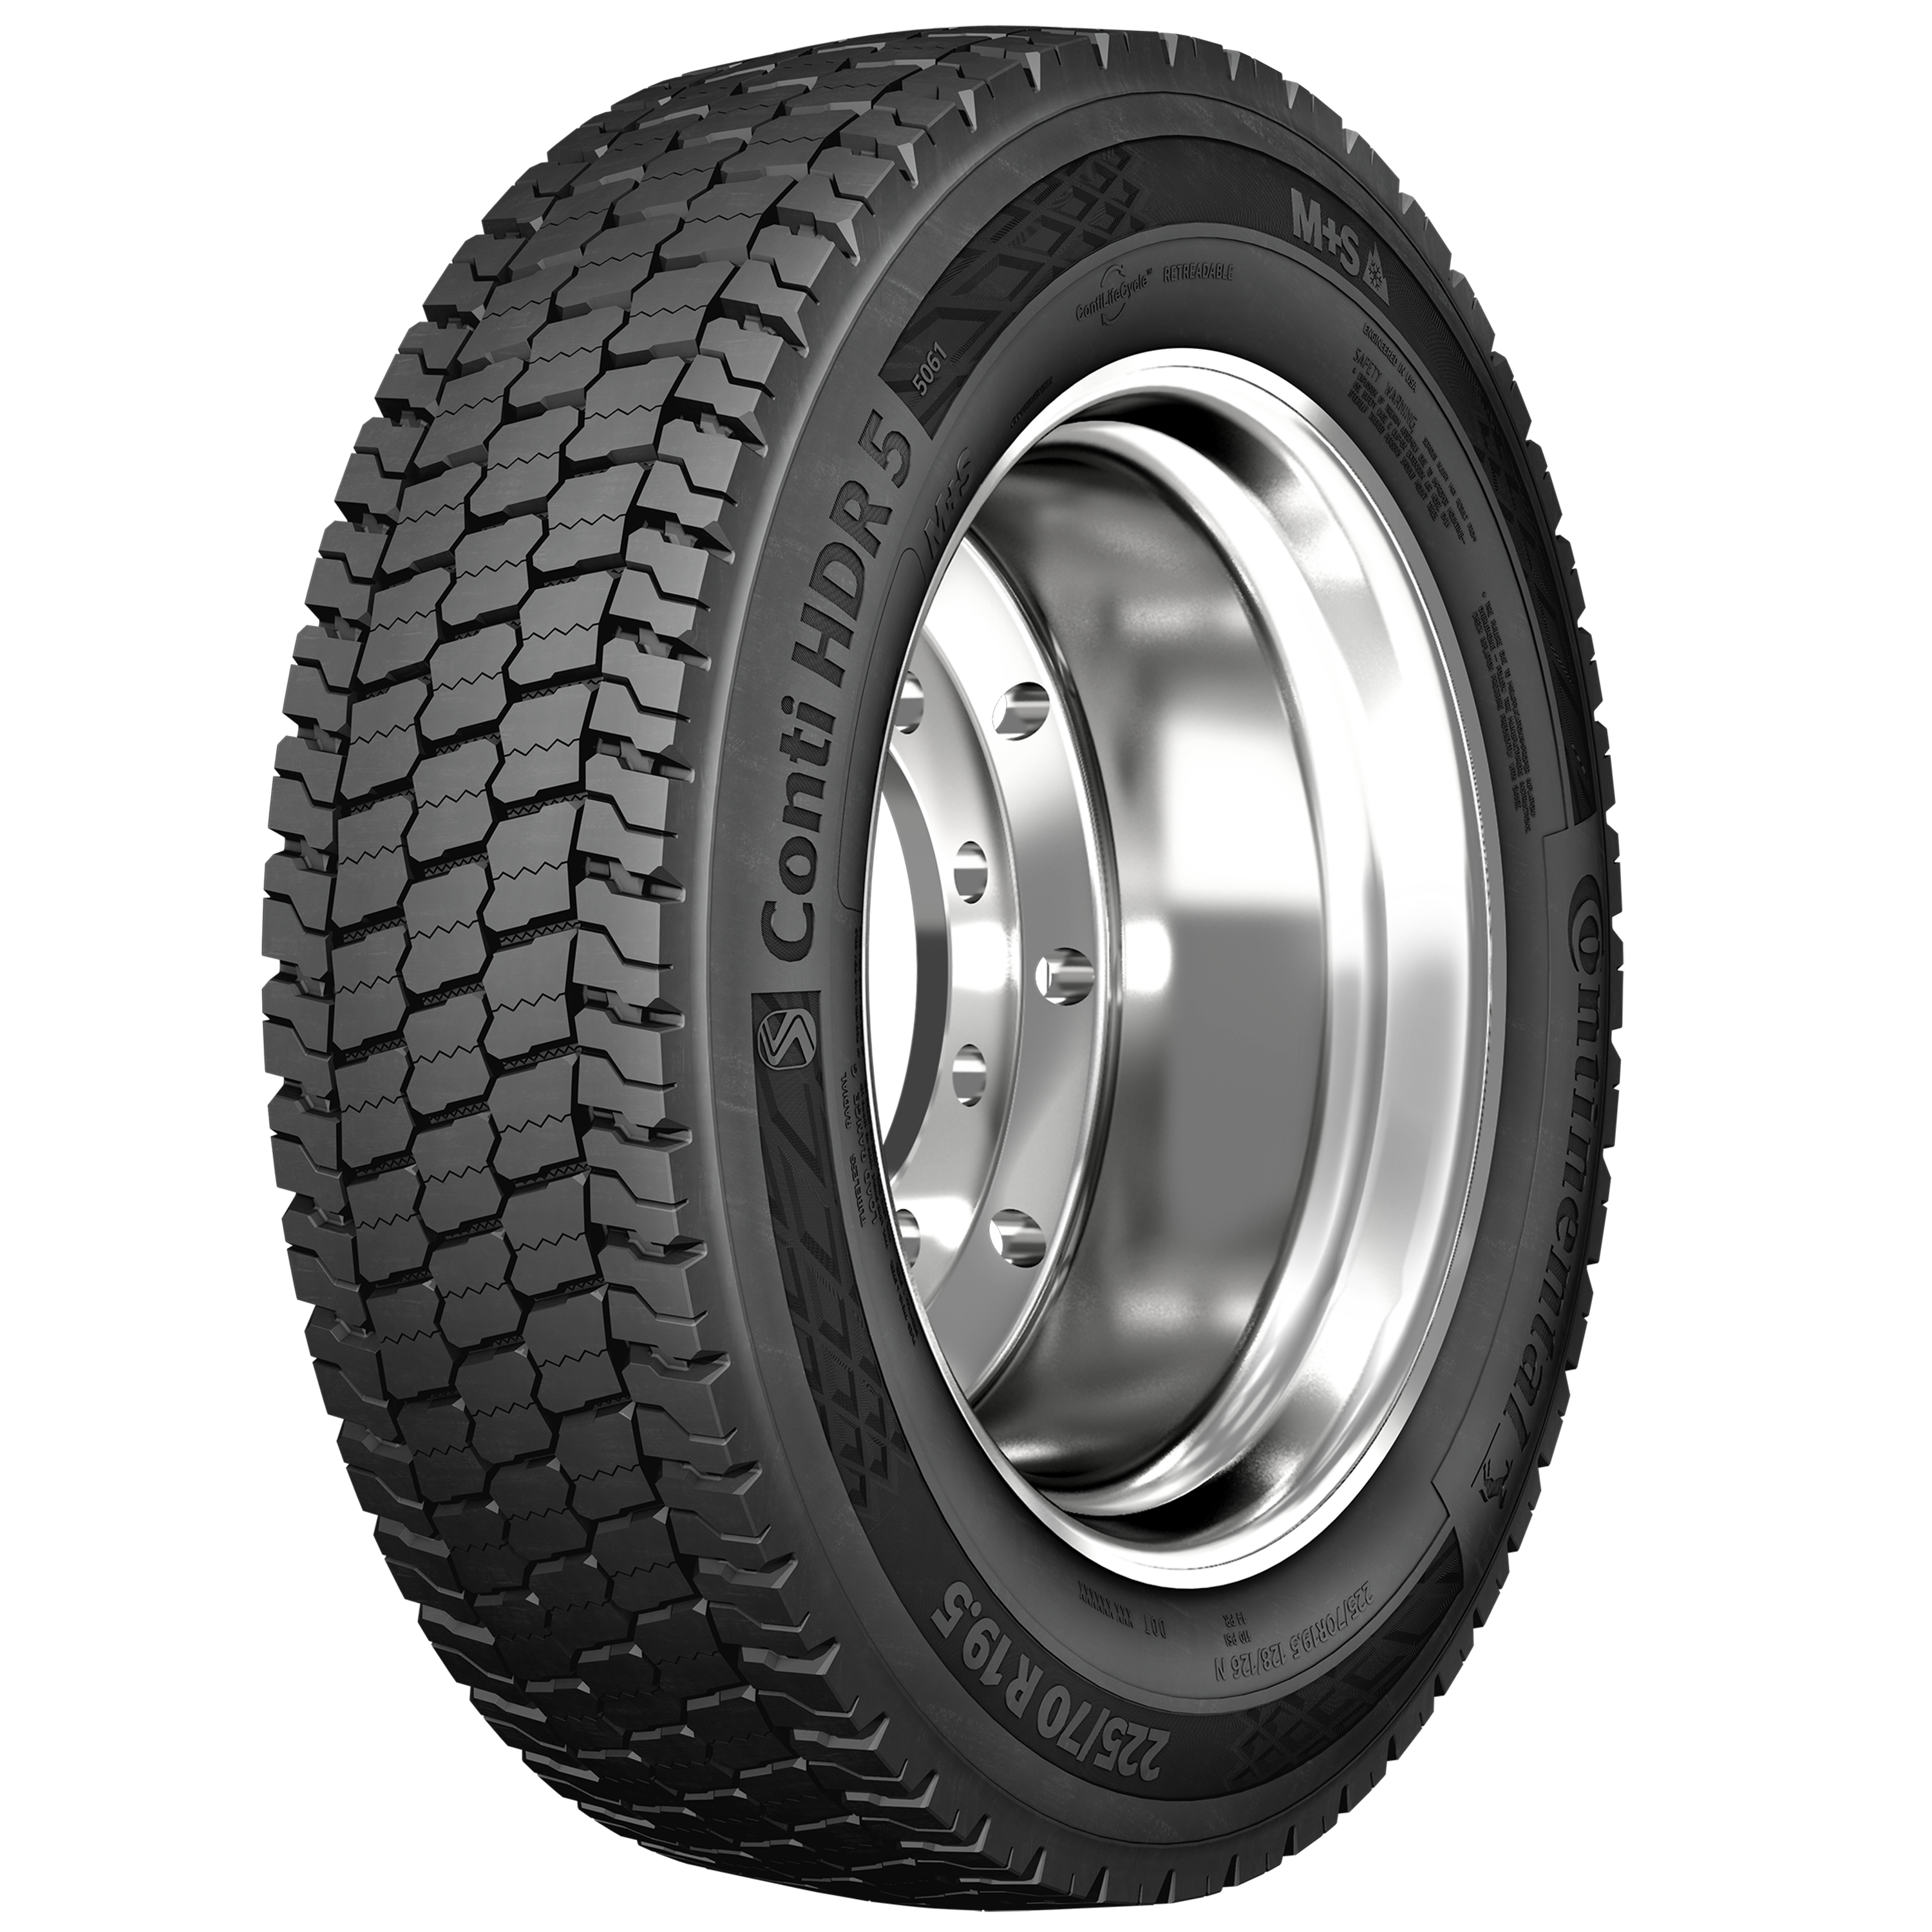 19.5" regional drive tire with an open shoulder tread design, improved rolling resistance, traction, wear and durability.